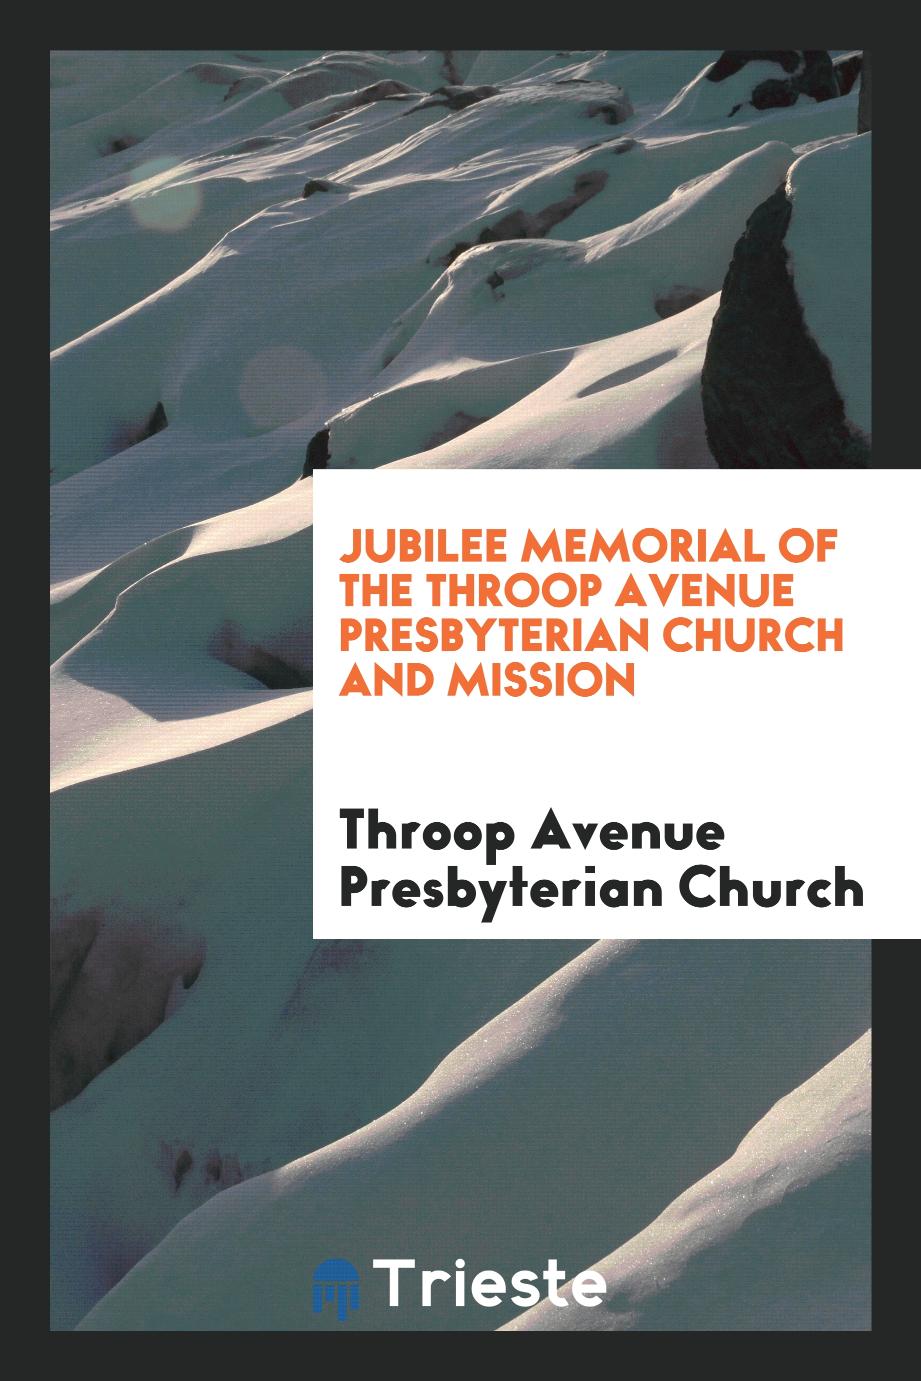 Jubilee Memorial of the Throop Avenue Presbyterian Church and Mission